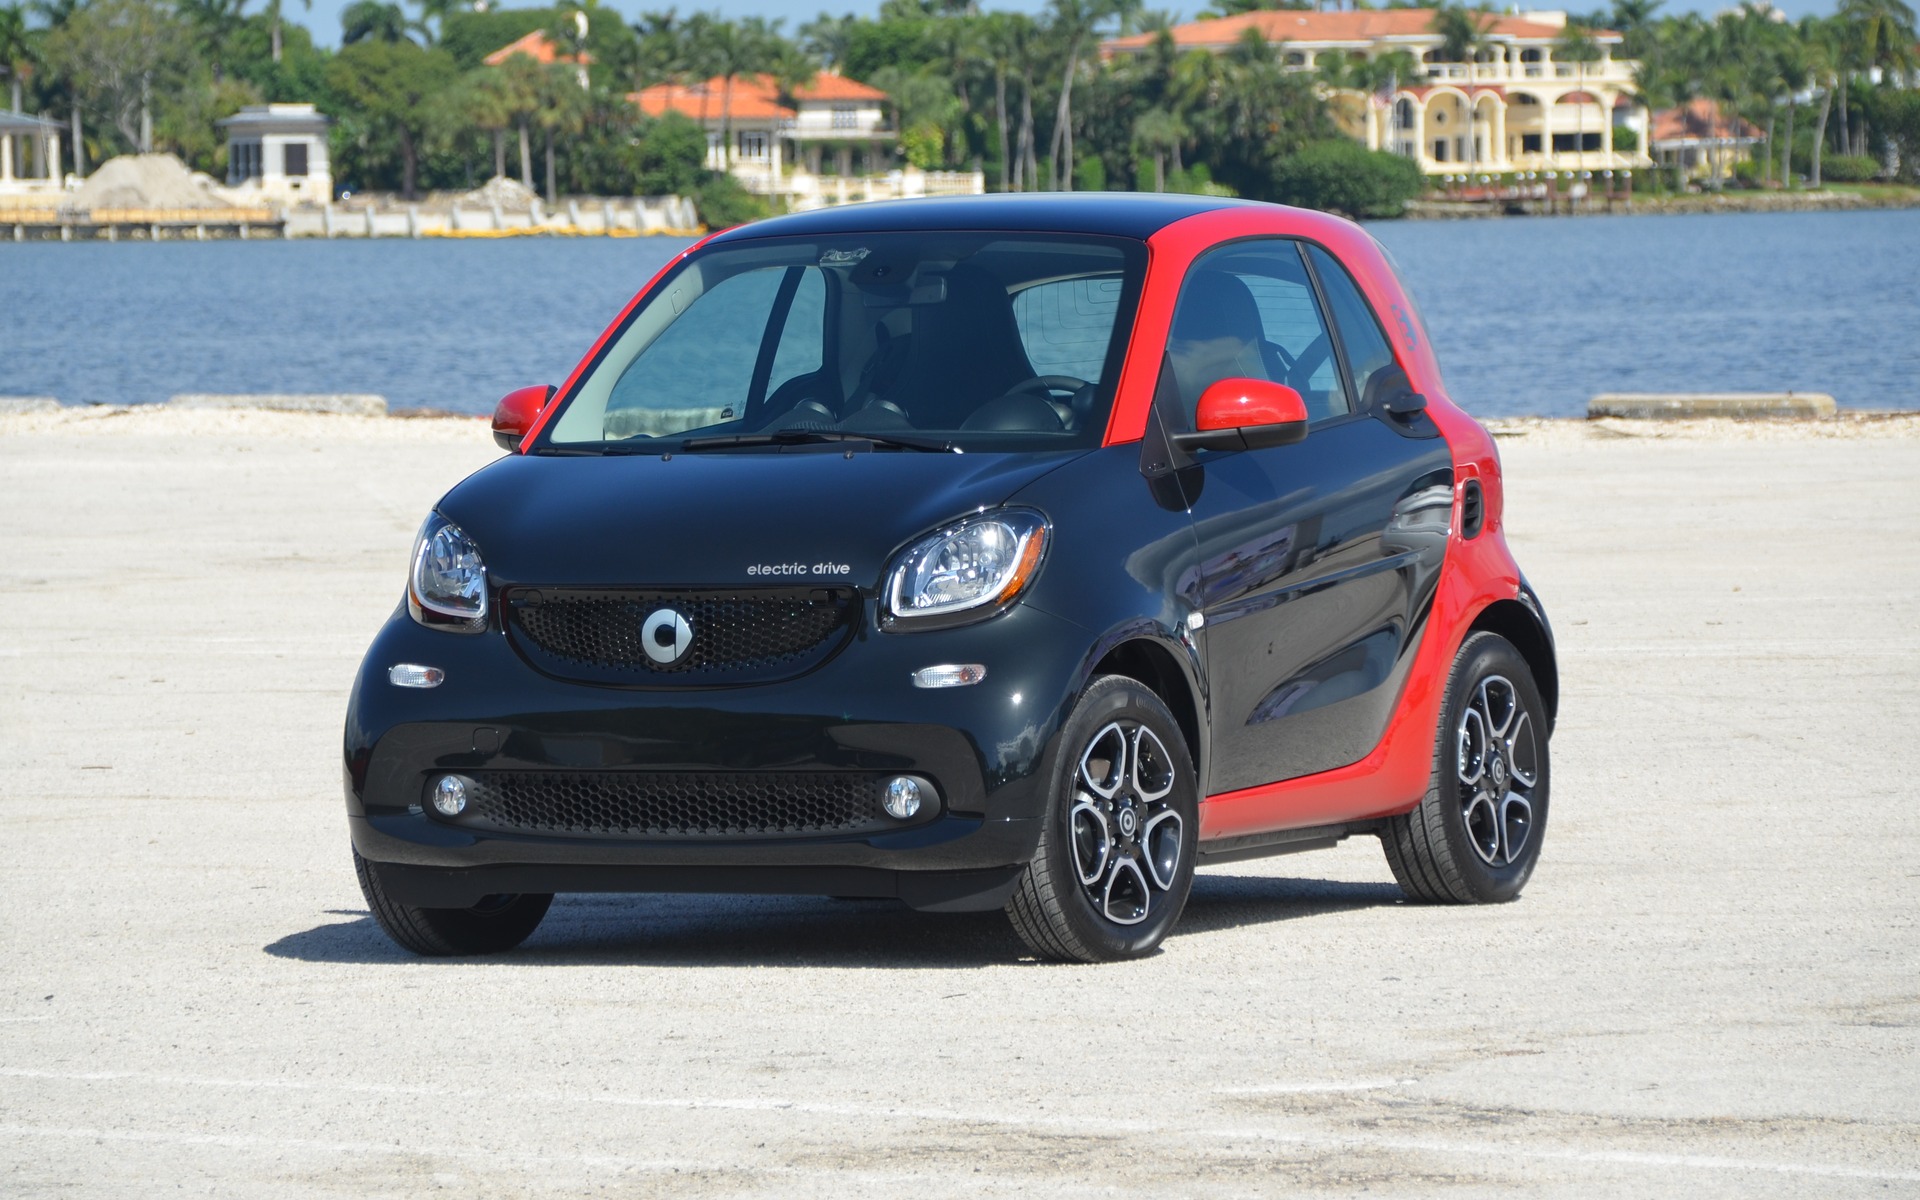 2017 smart fortwo electric drive: Electric, Stylish and Discreet